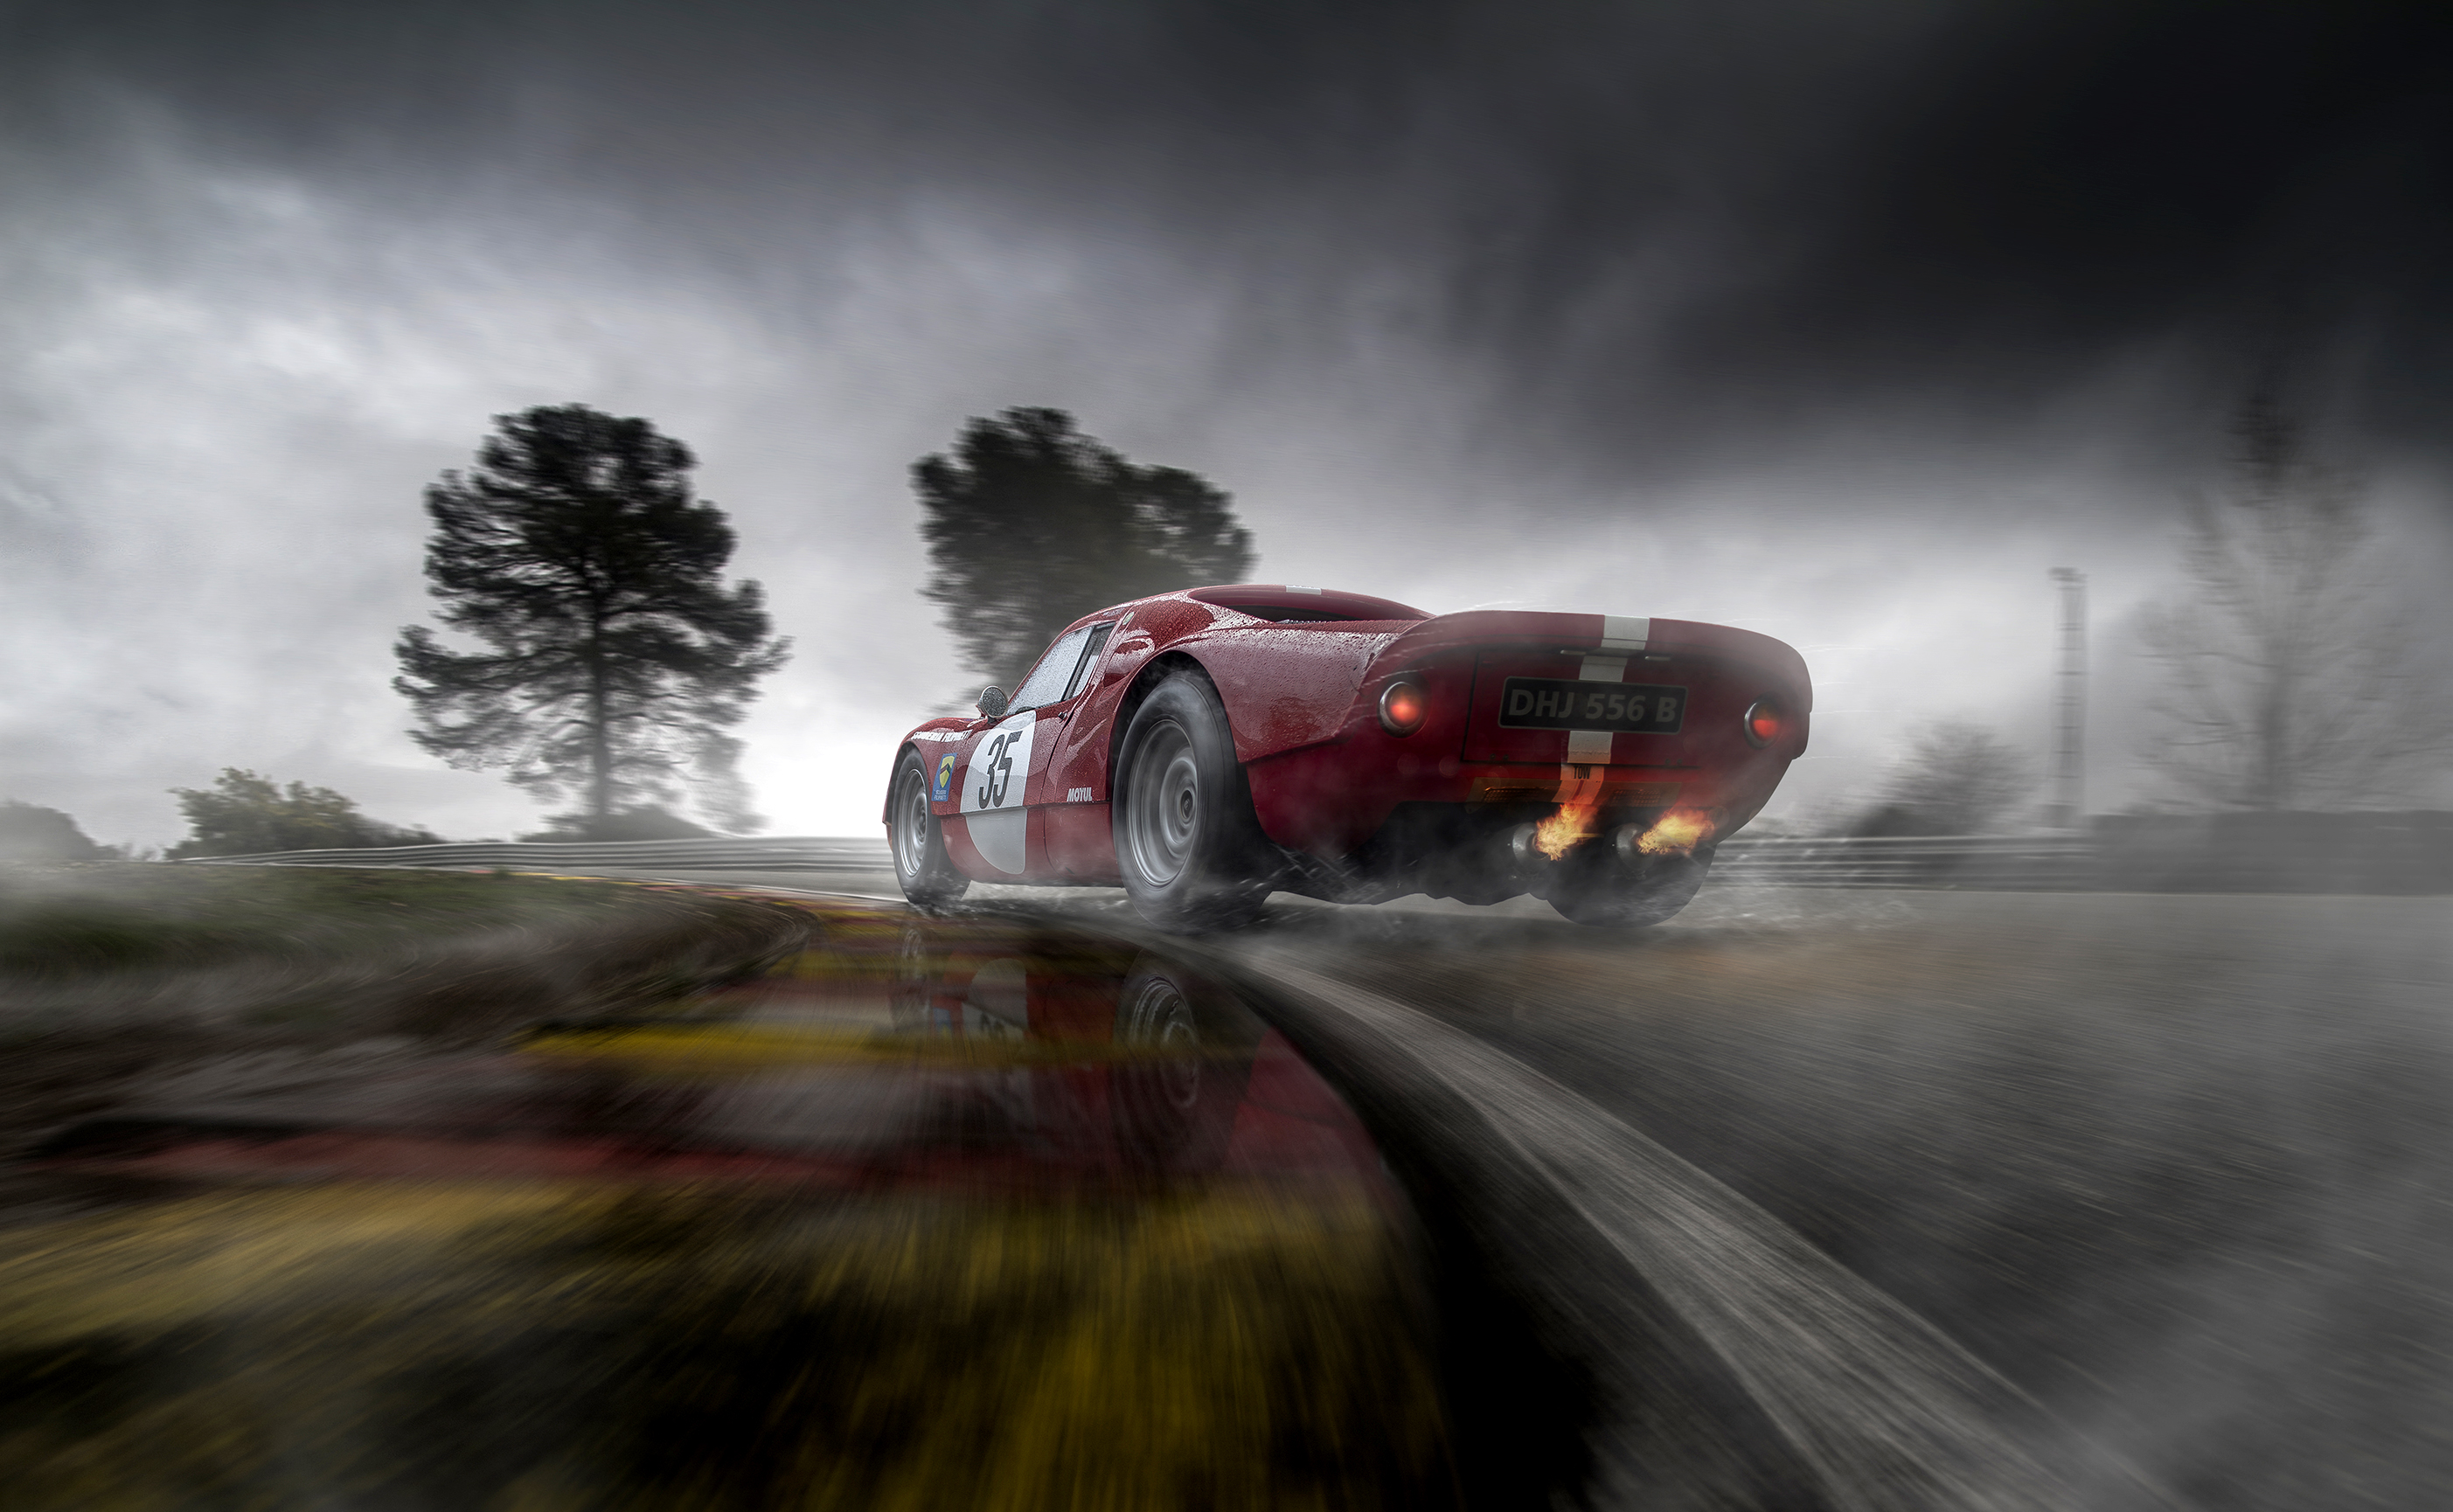 Photoshopped Porsche 904 in wet weather on racetrack